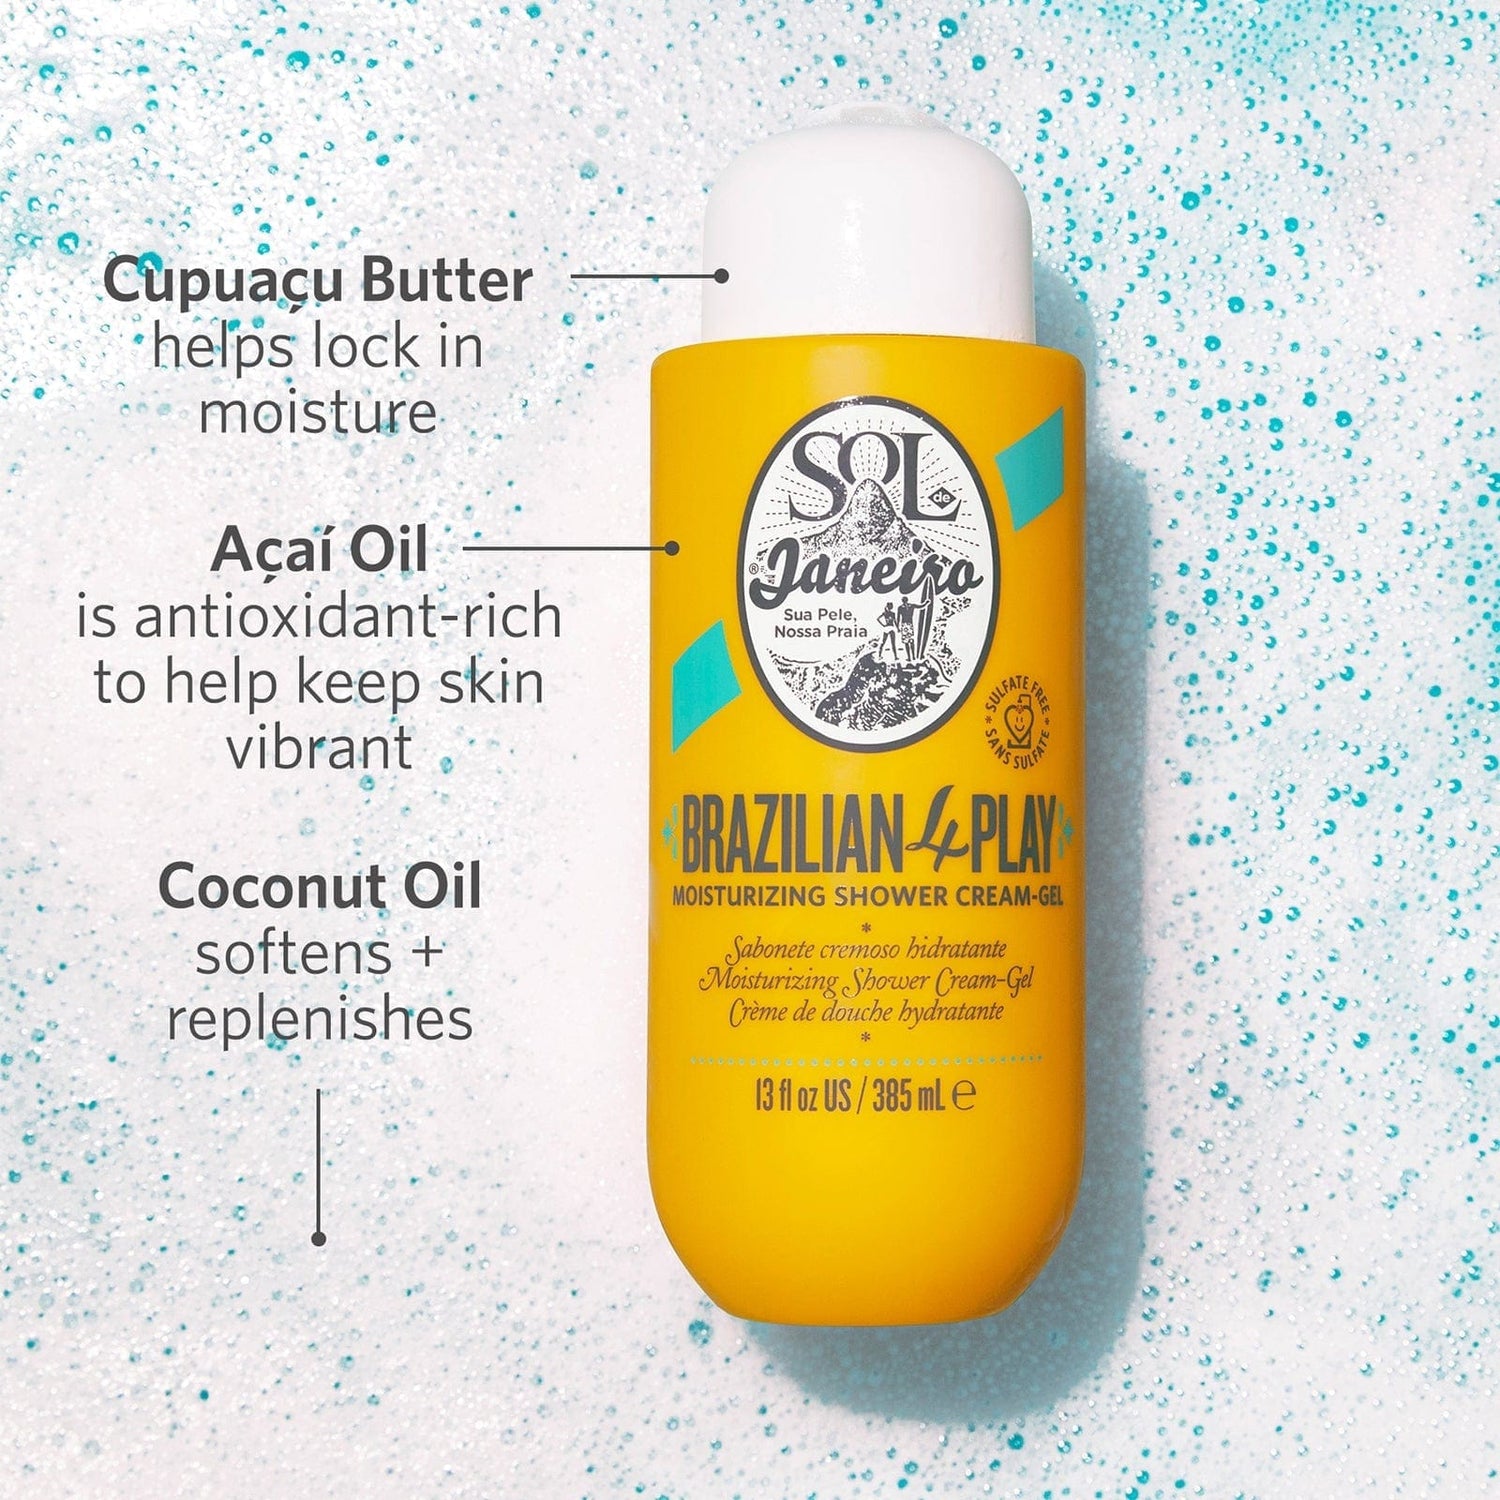 Cupuacu butter - helps lock in moisture. Acai oil - is antioxidant-rich to help keep skin vibrant. Coconut oil - softens + replenishes 